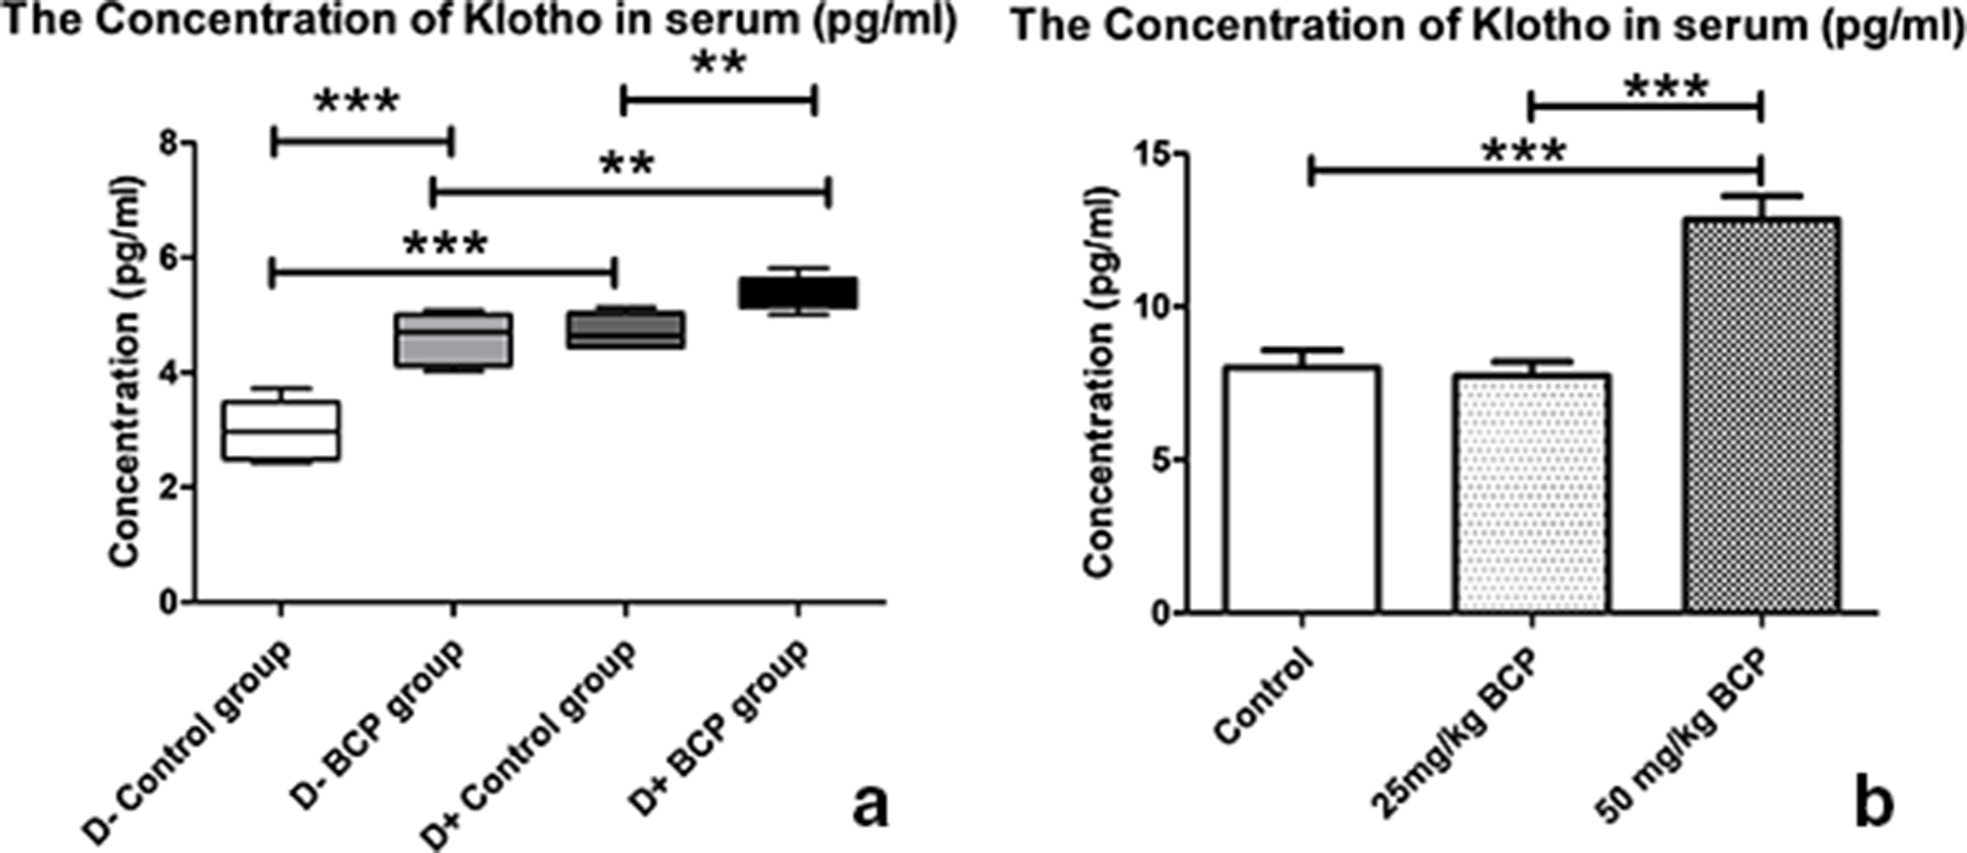 Fig. 5 
            Detection of klotho in the serum of mice fed on vitamin D-containing and vitamin D-deficient diets that were treated with ß-caryophyllene (BCP) or with propylene glycol control. Whole blood was collected from mice, the serum fraction was isolated by centrifugation, sera from individuals in each group were pooled, and the relative levels of klotho were detected by enzyme-linked immunosorbent assay (ELISA). a) The effect of vitamin D and BCP treatment on serum levels of klotho. b) The effect of different concentrations of BCP treatment on levels of klotho in serum. Three groups of mice (n = 5/group) were fed on a vitamin D-sufficient diet for six weeks. For the last two weeks, they were treated by oral gavage for five days/week with propylene glycol control or with 25 mg/kg or 50 mg/kg BCP. Serum samples from each group were pooled and tested for the presence of klotho by ELISA. **p < 0.010; ***p < 0.001.
          